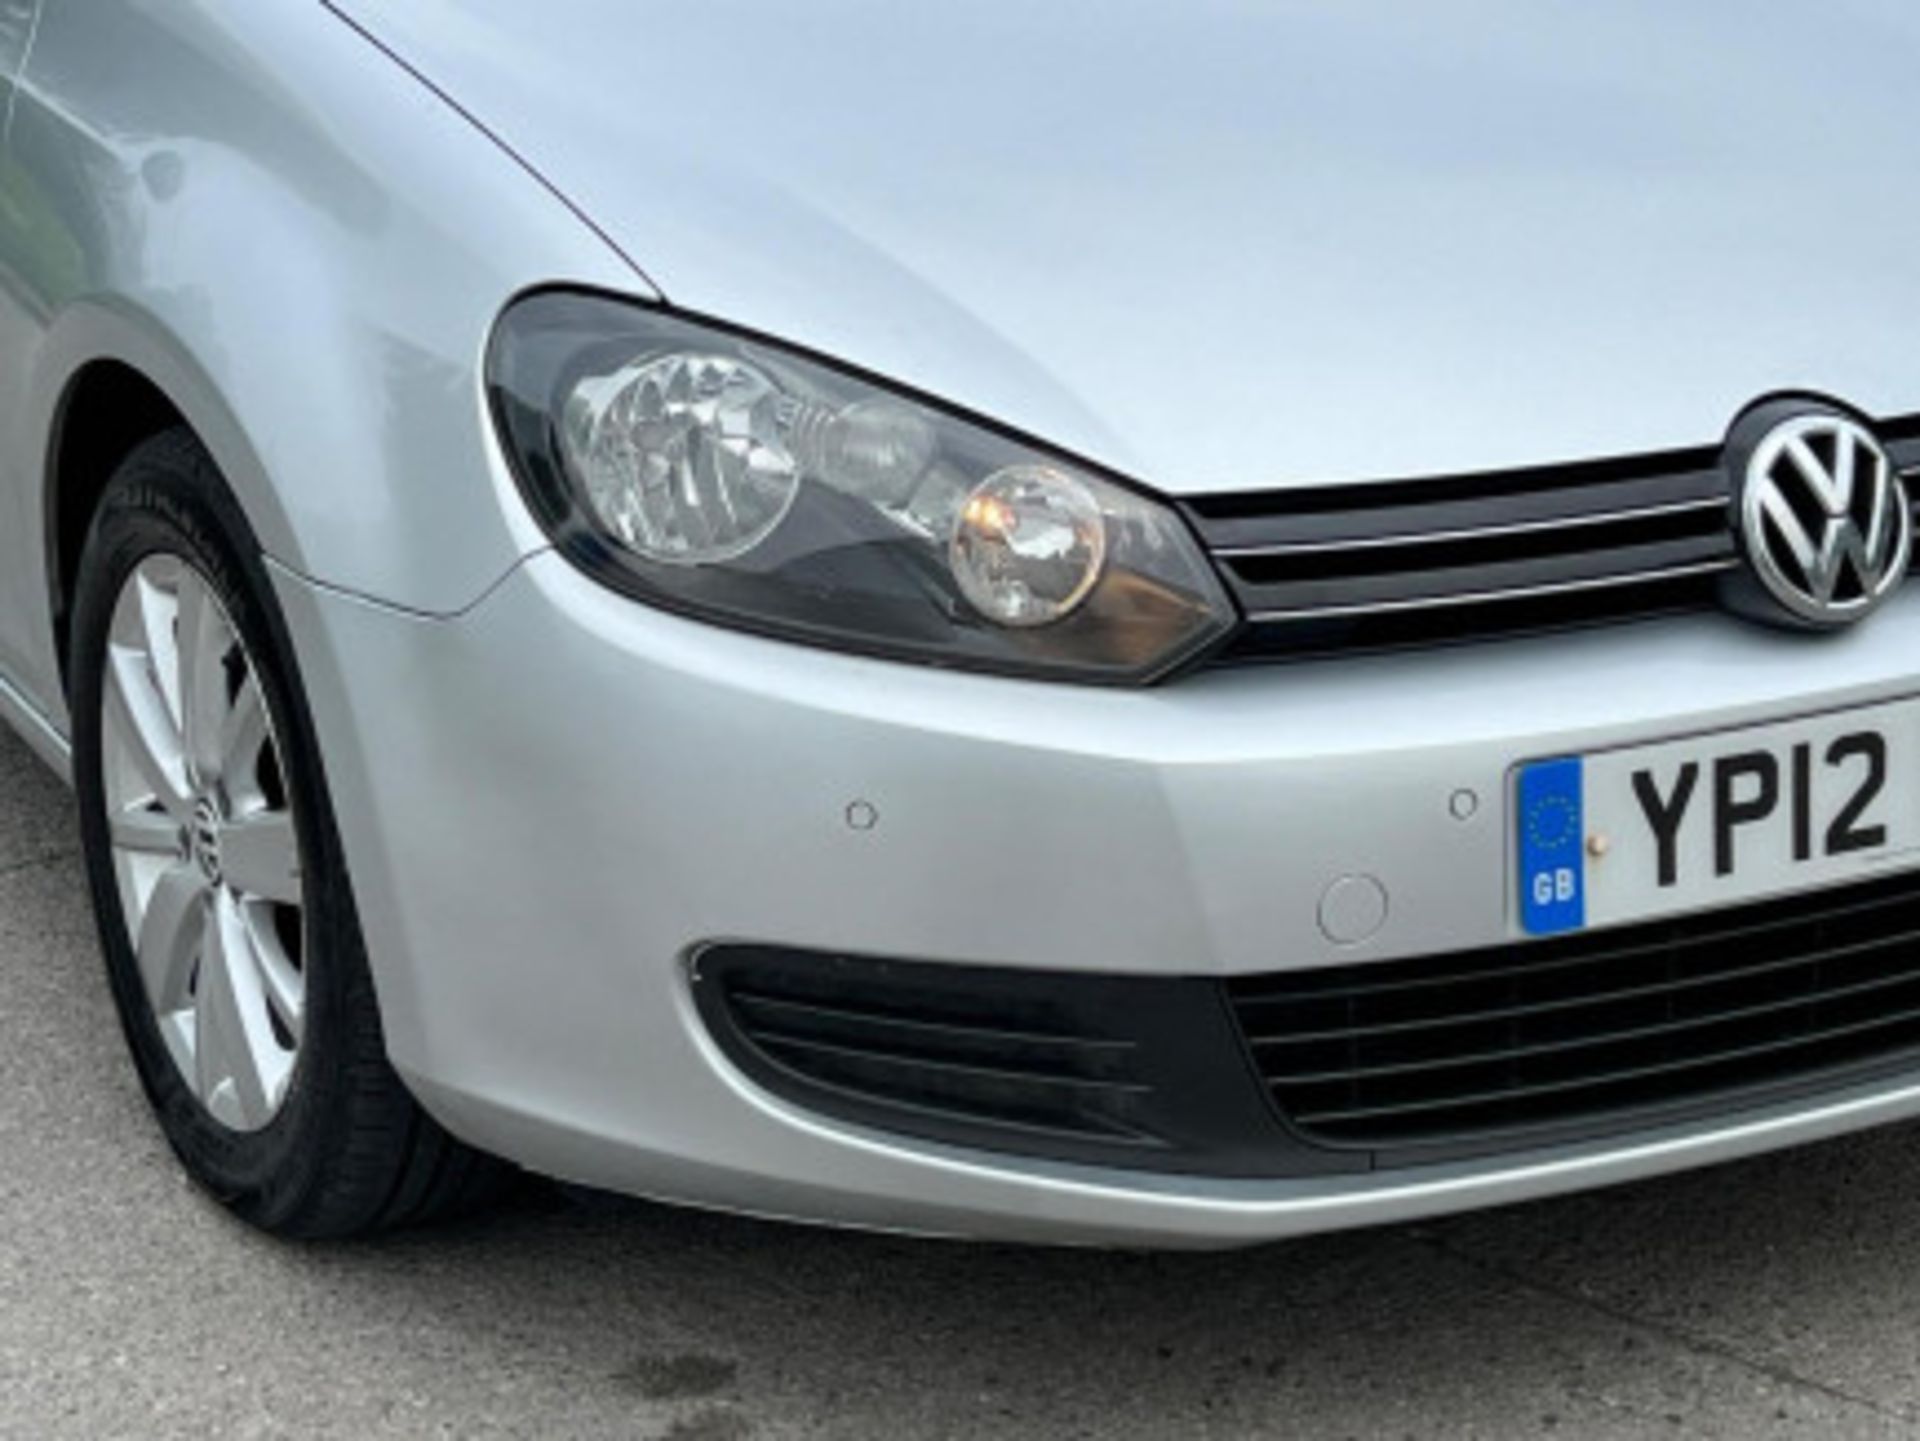 IMPECCABLE 2012 VOLKSWAGEN GOLF 1.6 TDI MATCH >>--NO VAT ON HAMMER--<< - Image 42 of 116